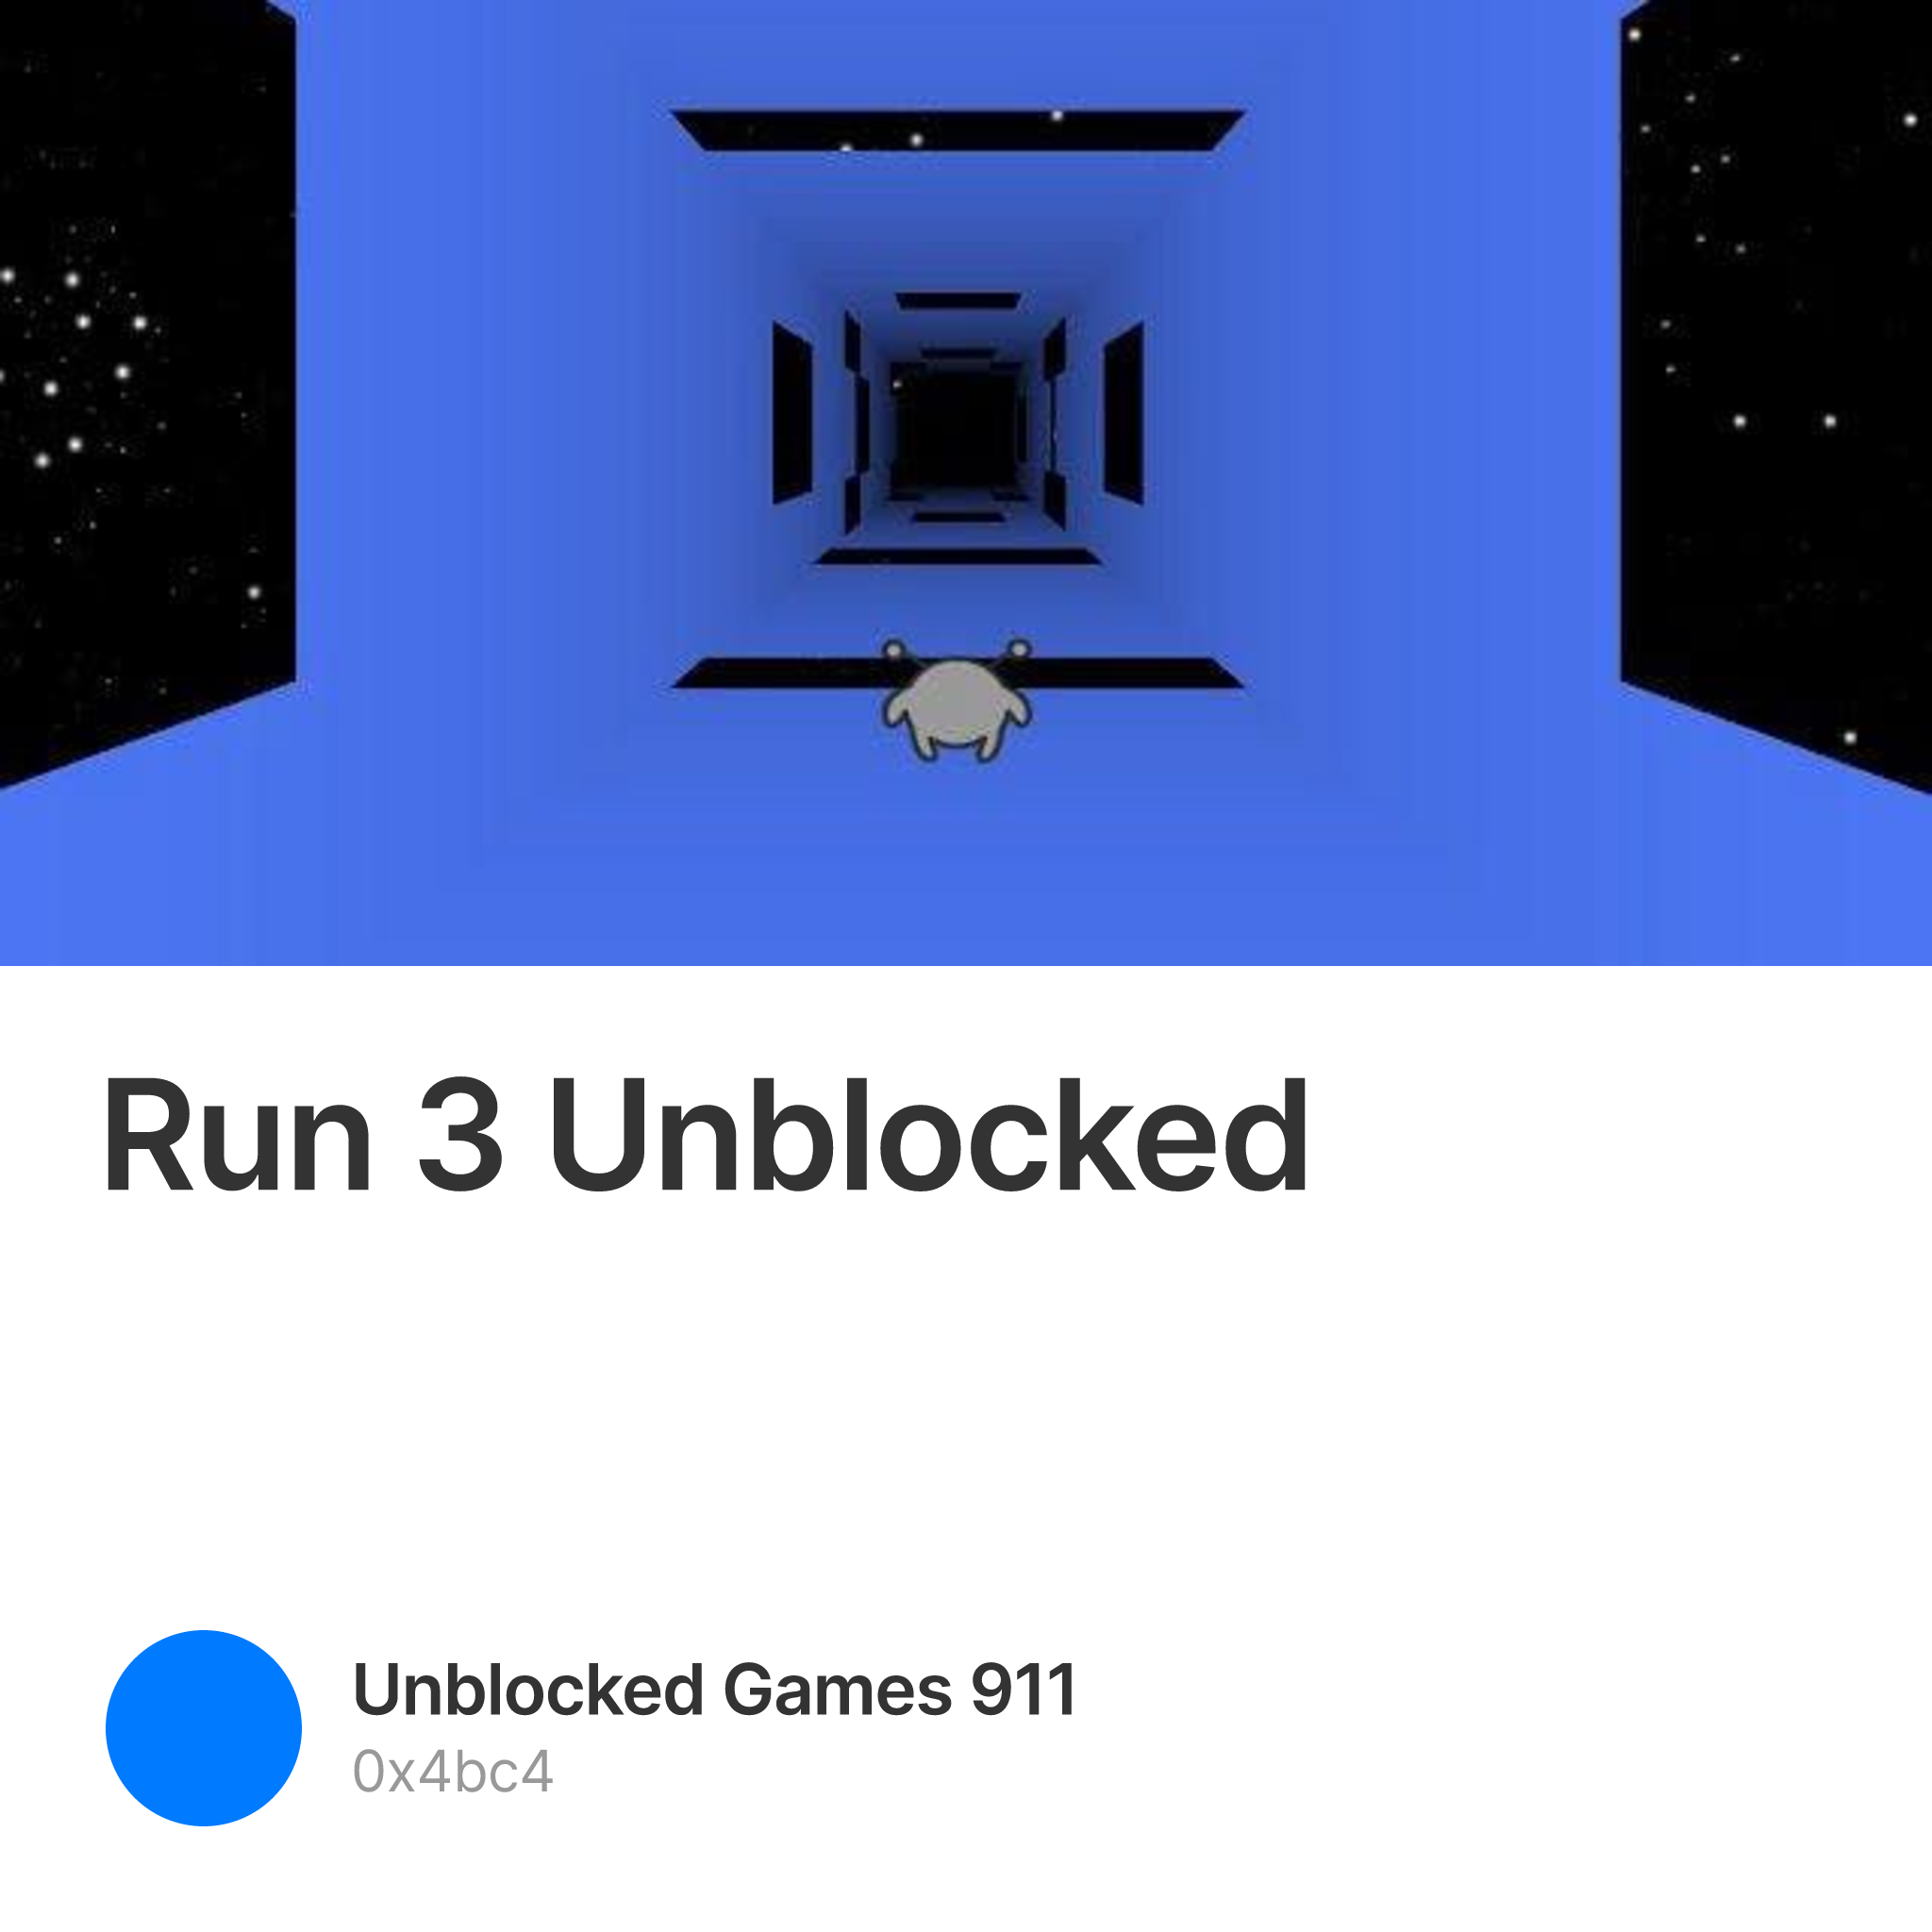 Unblocked Games 911: 2023 Overview